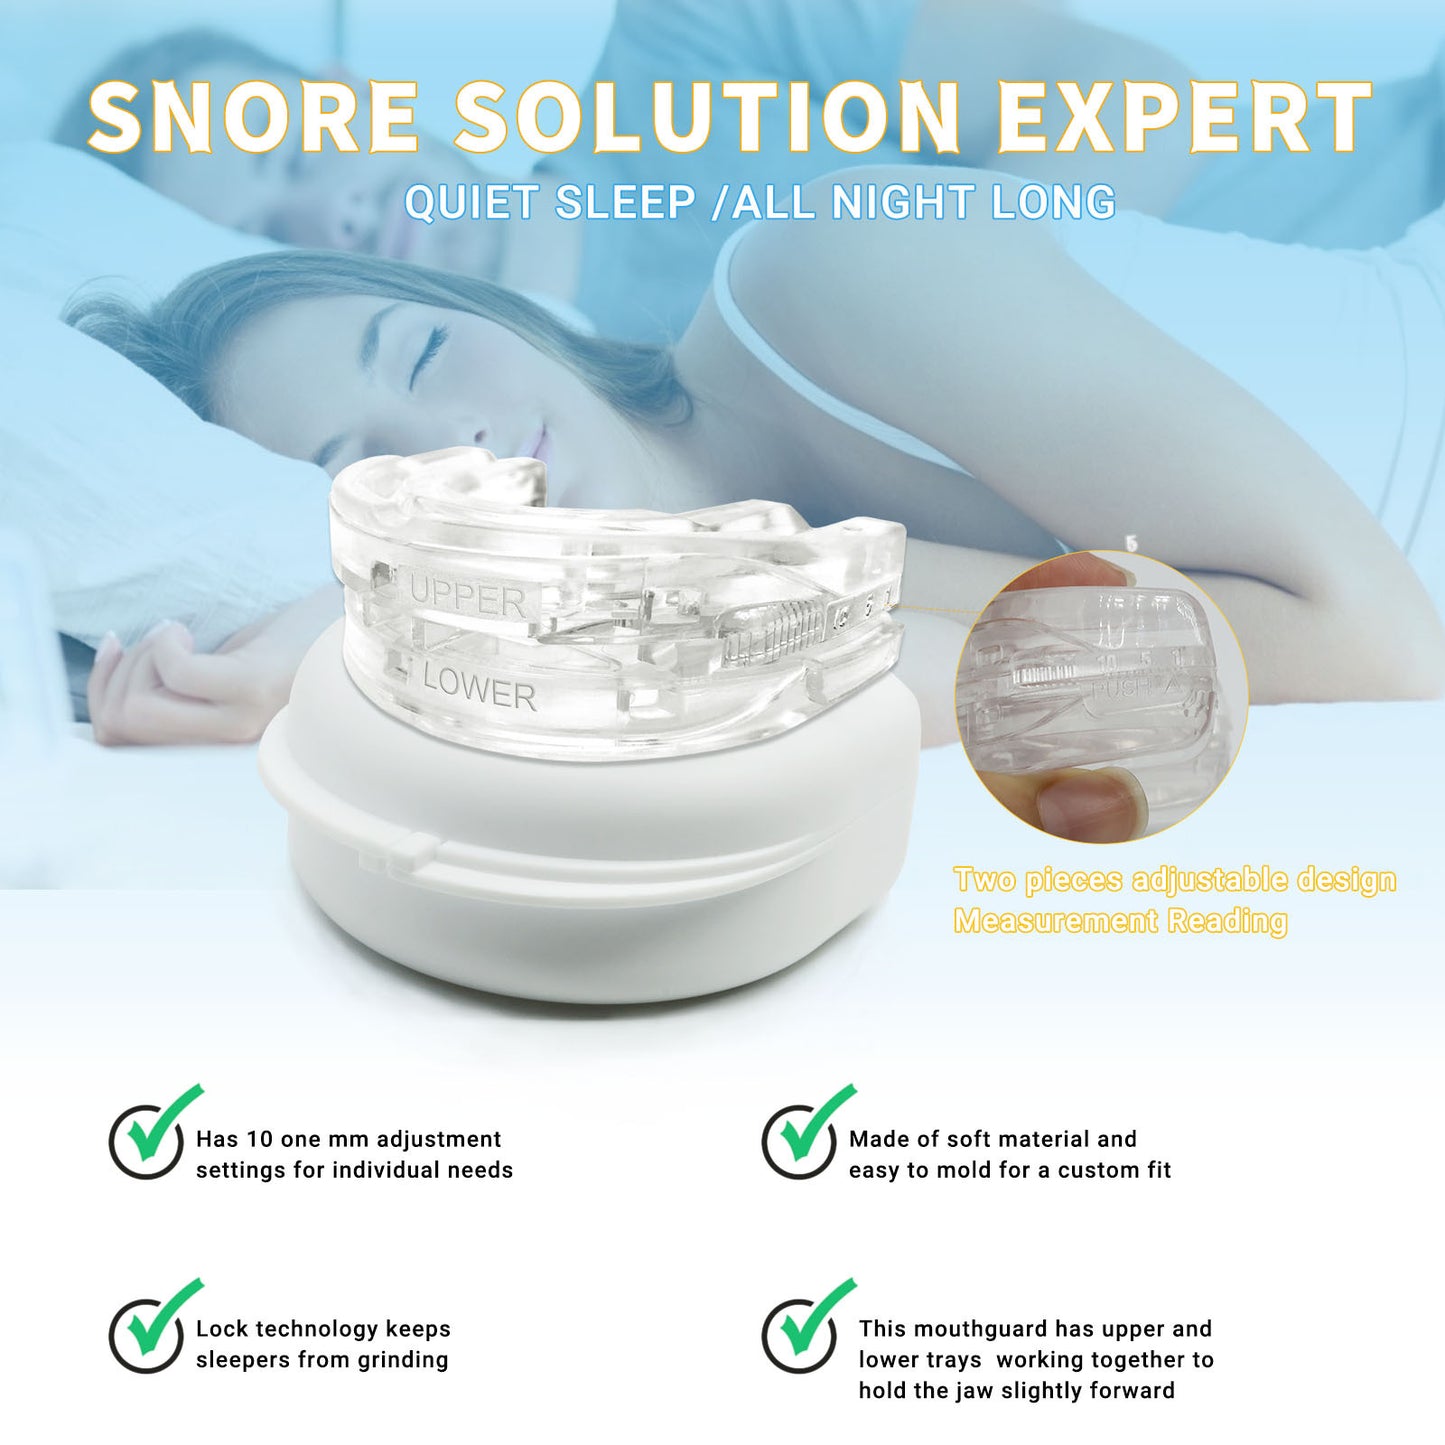 SNORE SOLUTION EXPERT